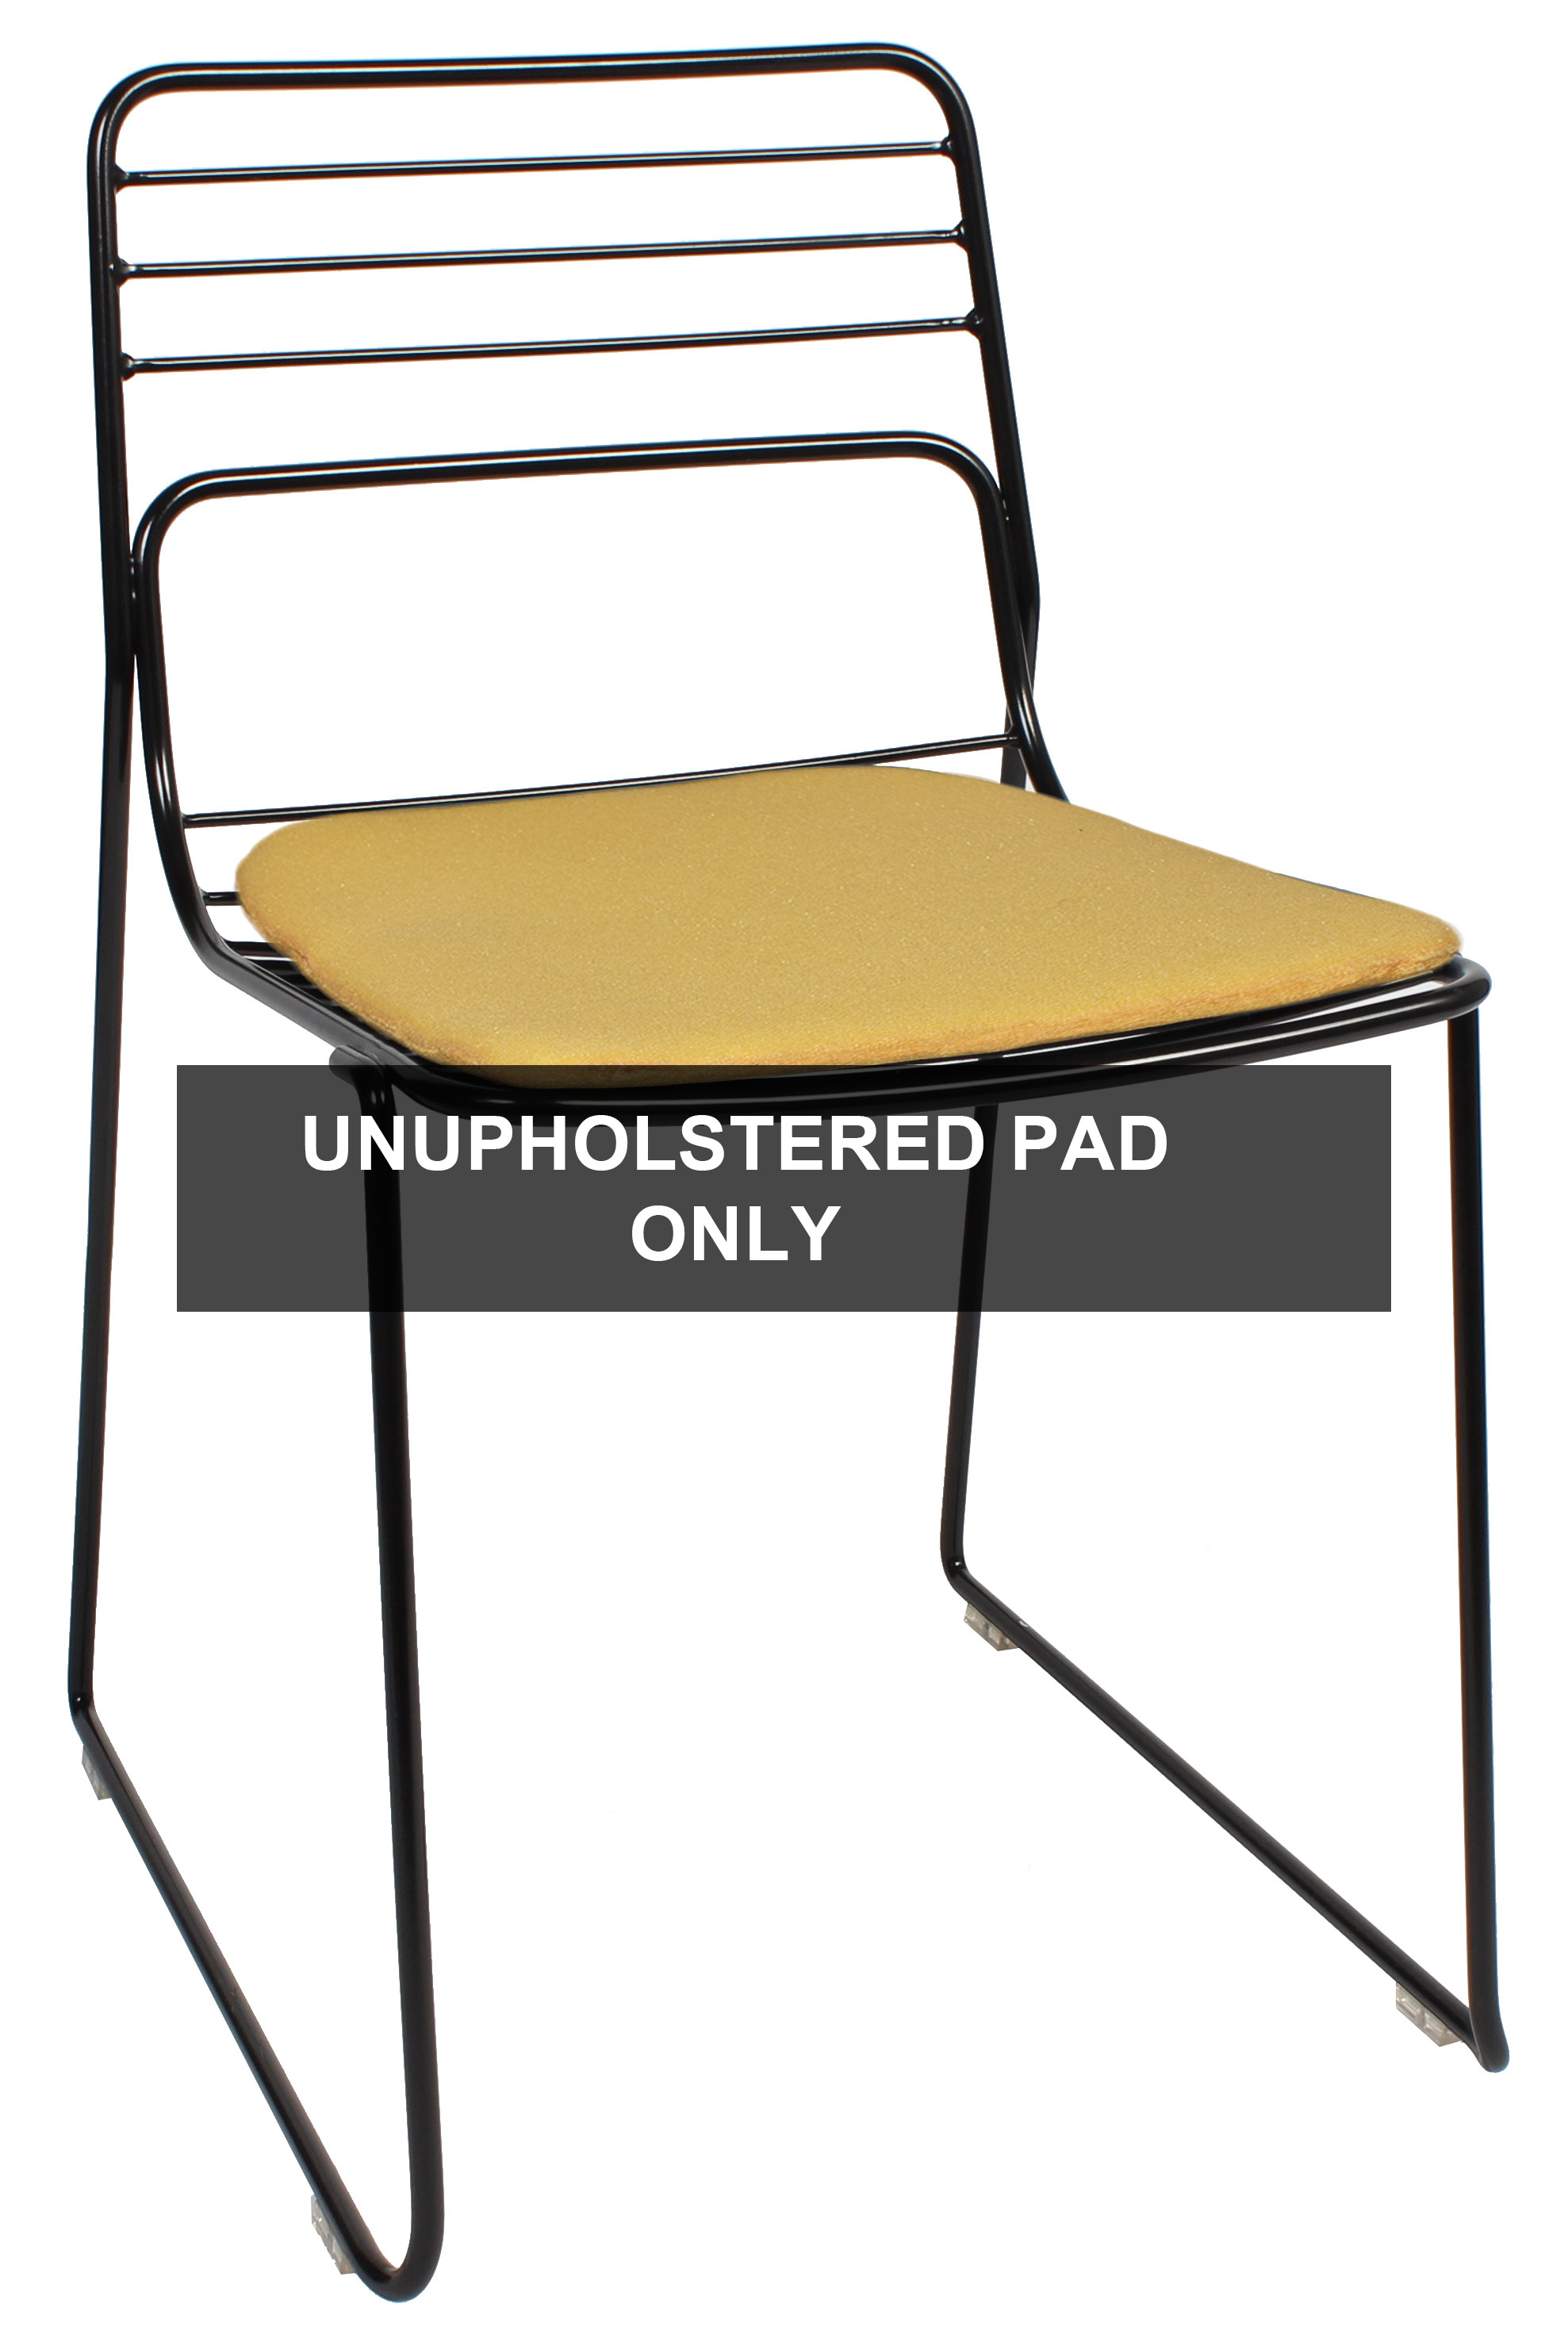 PAD FOR CAGE CHAIR UNUPHOLSTERED